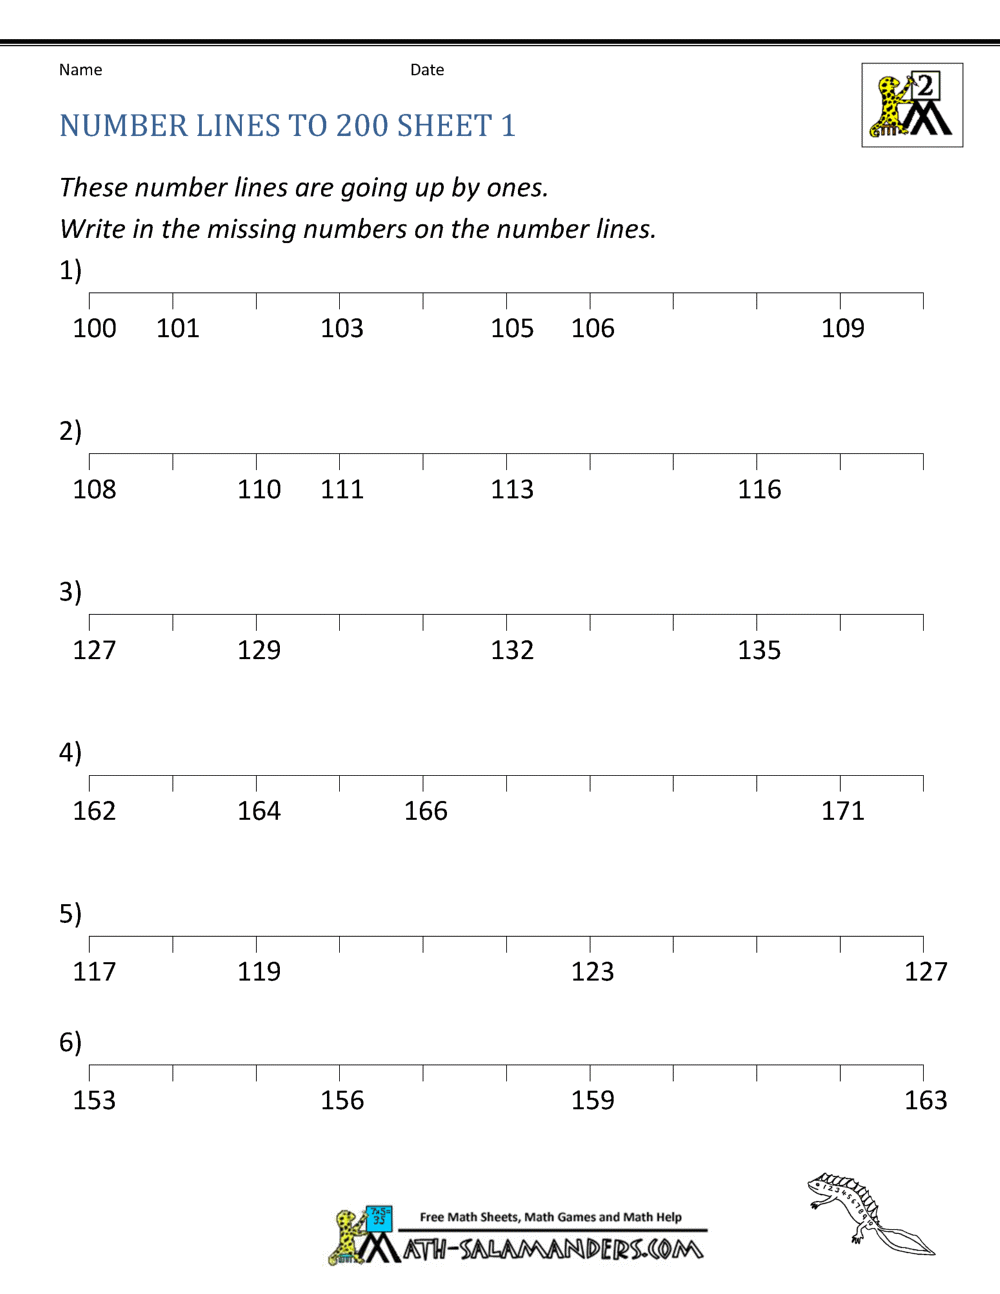 number-lines-worksheets-counting-by-1s-and-halves